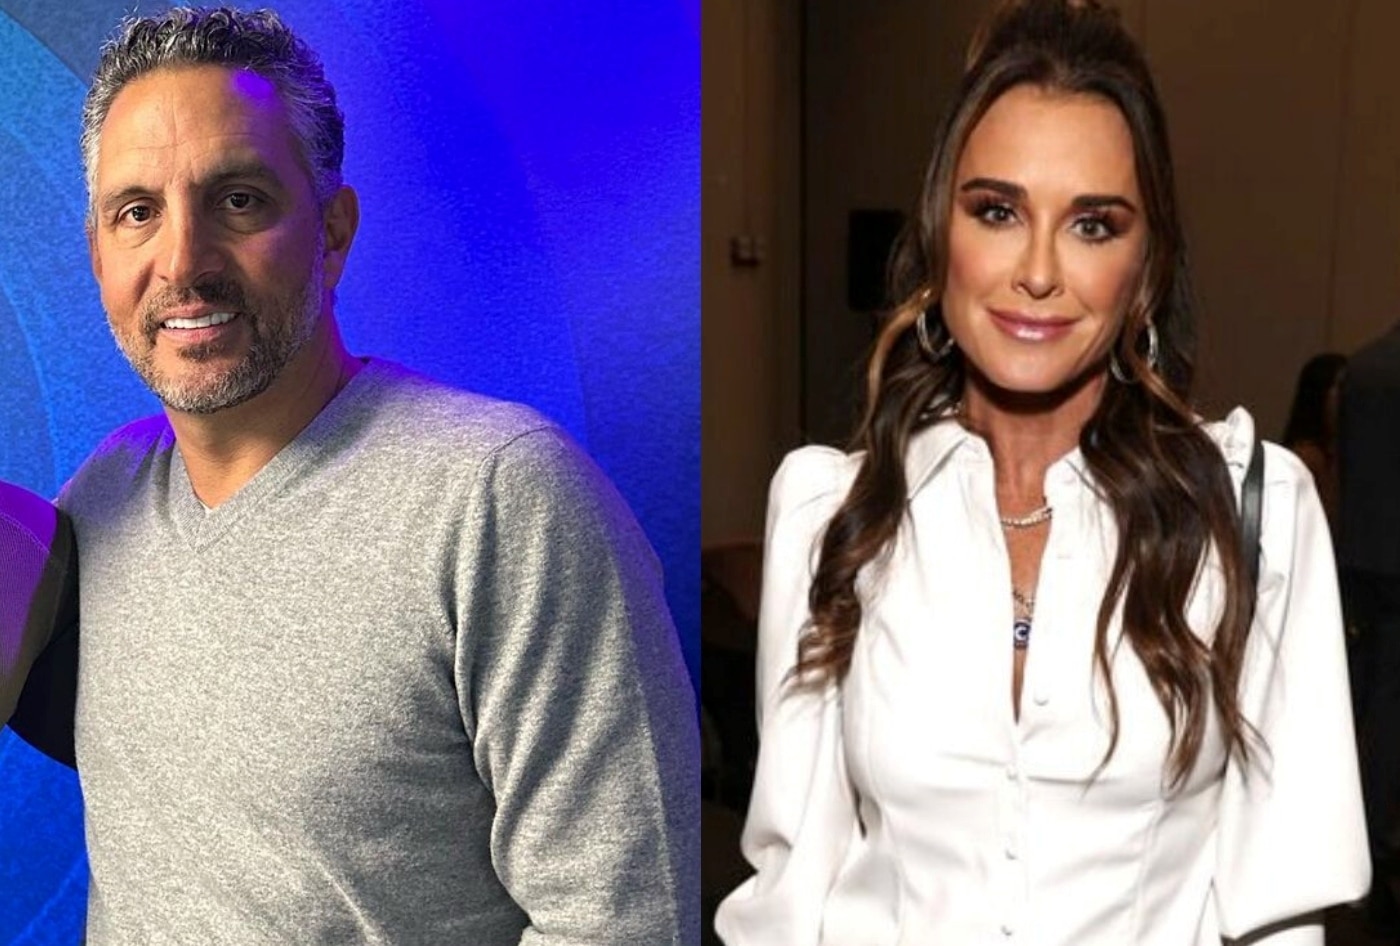 RHOBH's Mauricio Umansky Moves Out of Home With Kyle Richards as He Buys Luxury Condo, Plus Why He Won't Divorce Kyle